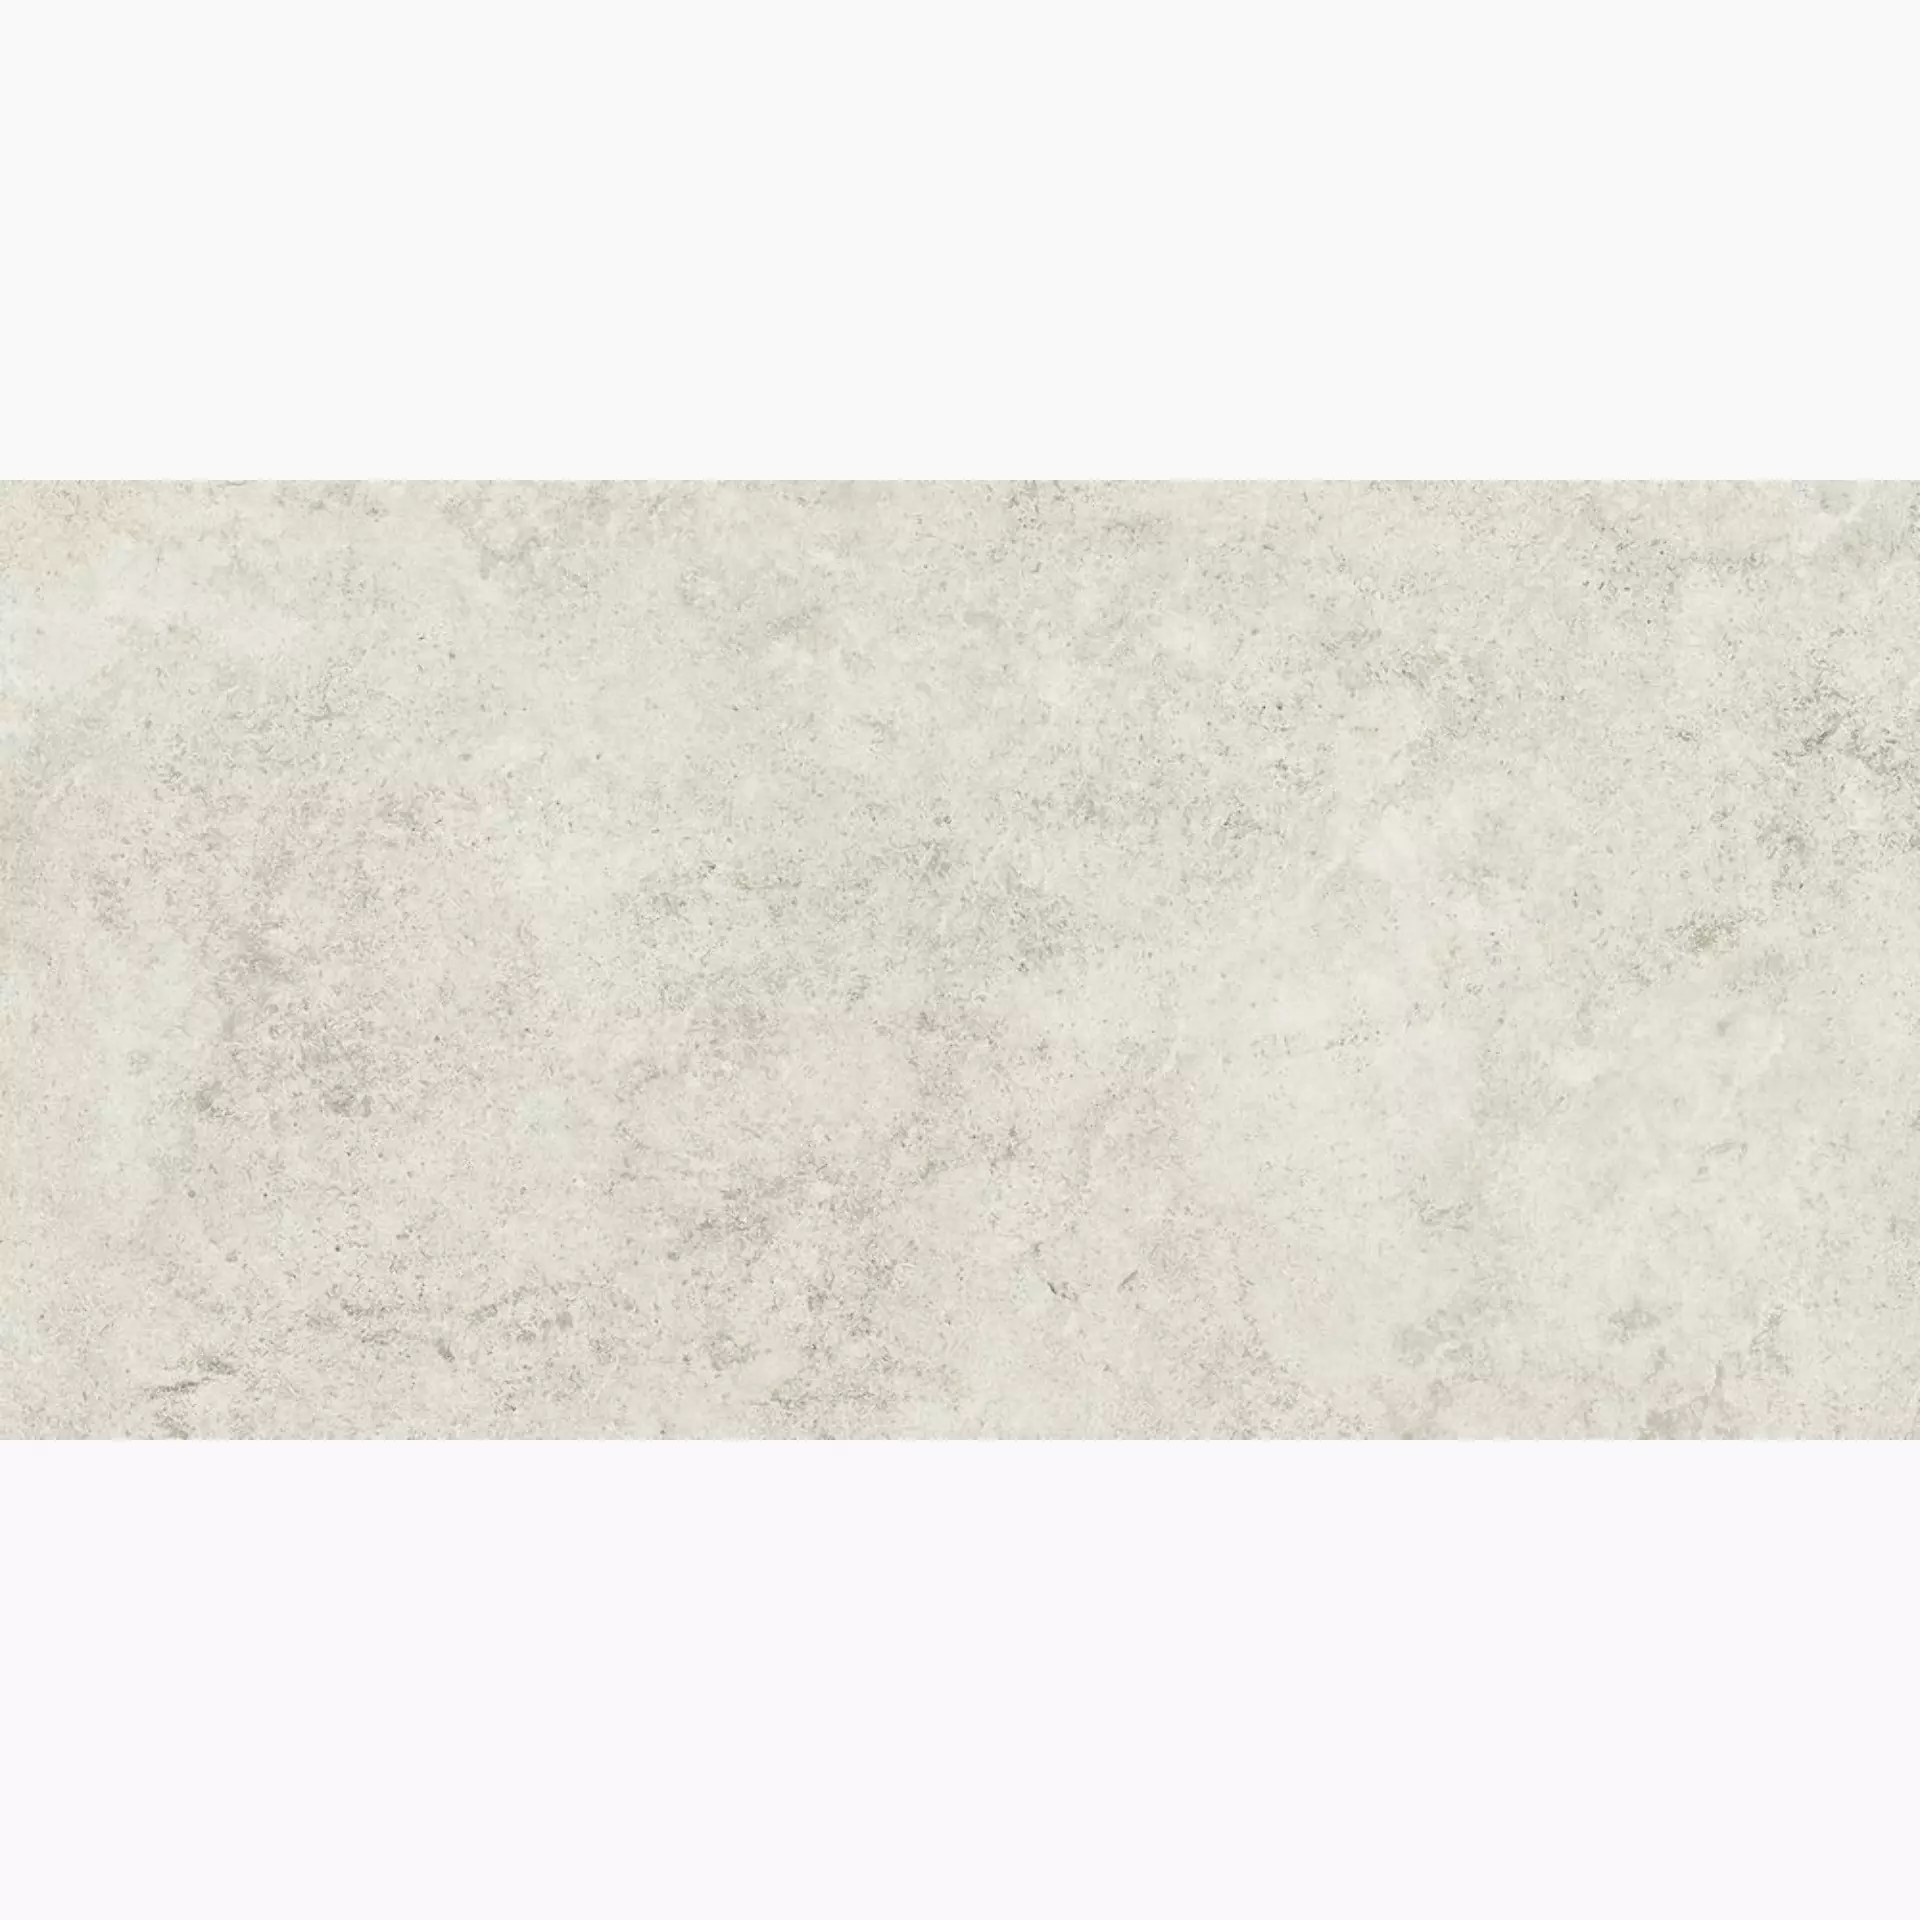 Century Glam Bianco Naturale 0112895 60x120cm rectified 9mm